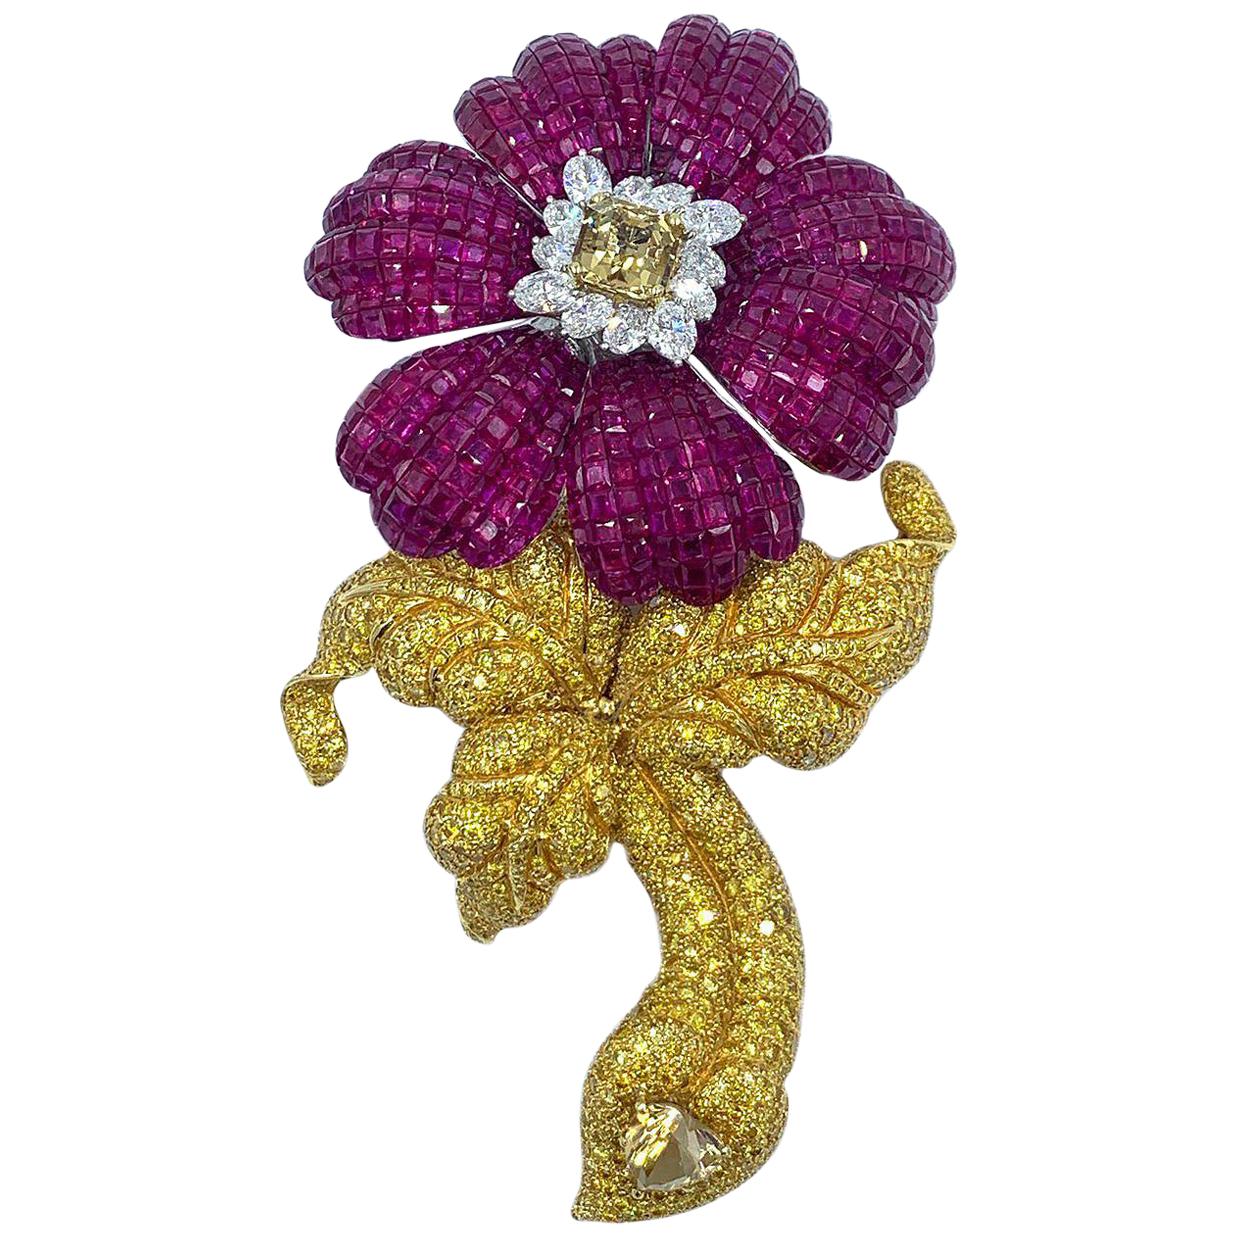 Massive and Fabulous Ruby and Canary Diamond Flower Brooch with Removable Stem